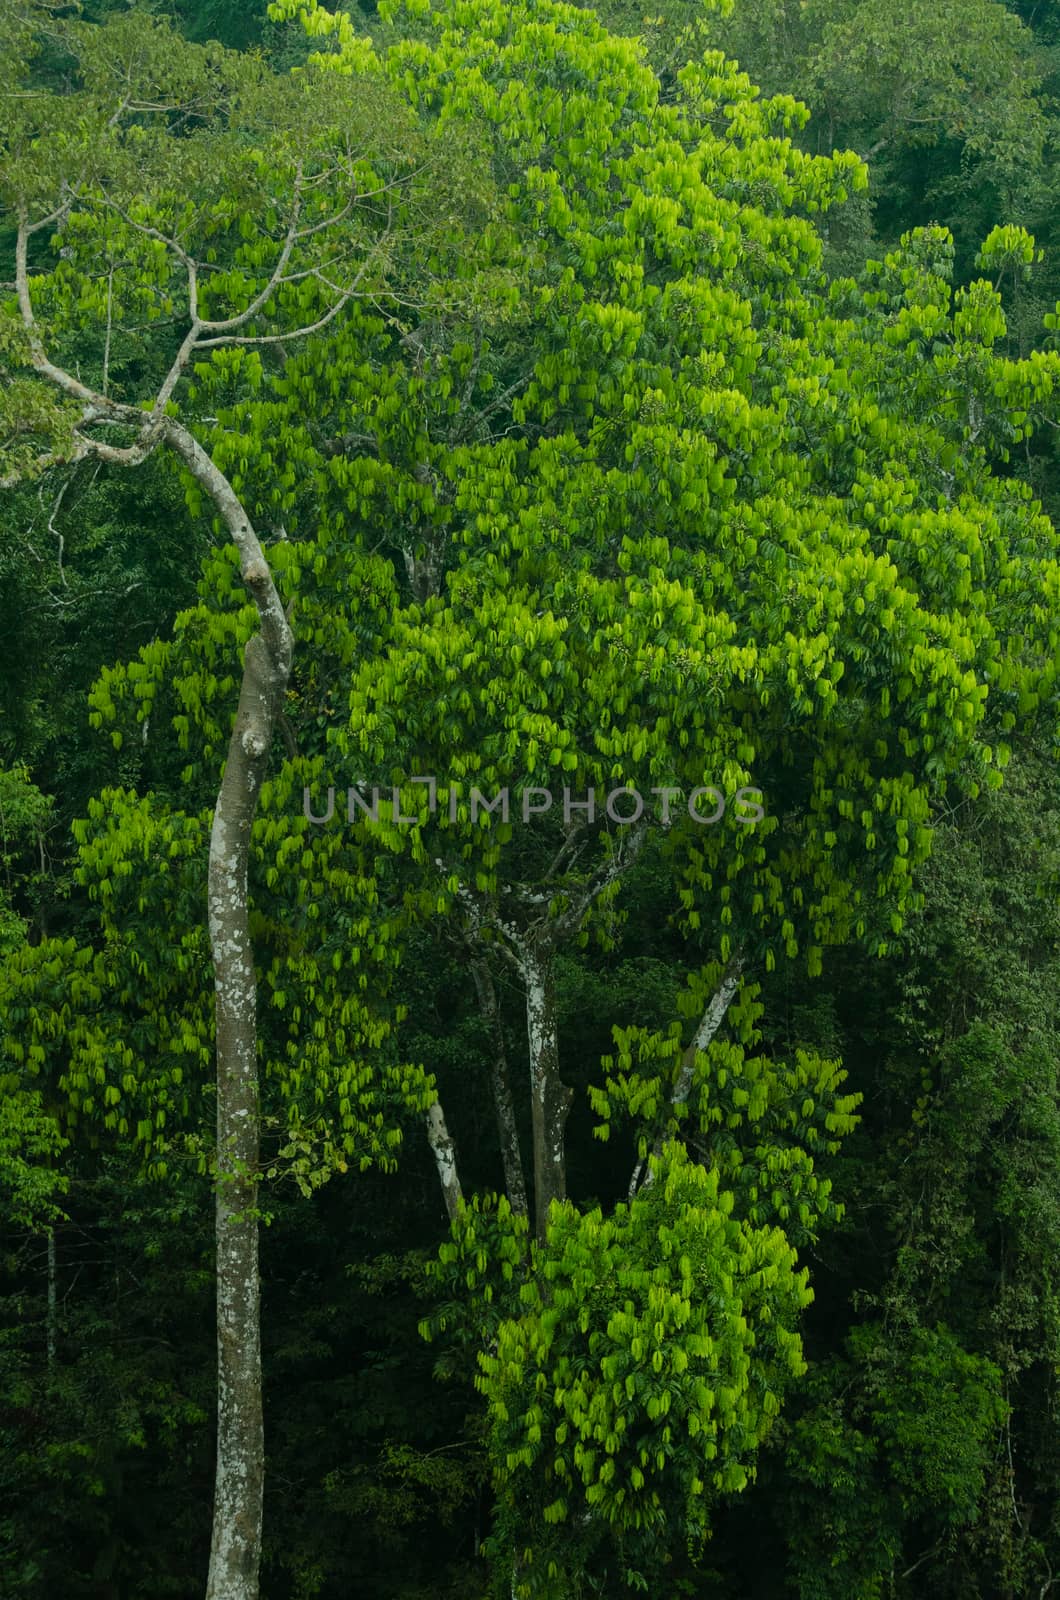 landscape nature have green plant and tree at rain forest mountain .its good place for outdoor travel on vacation or holidays in thailand.